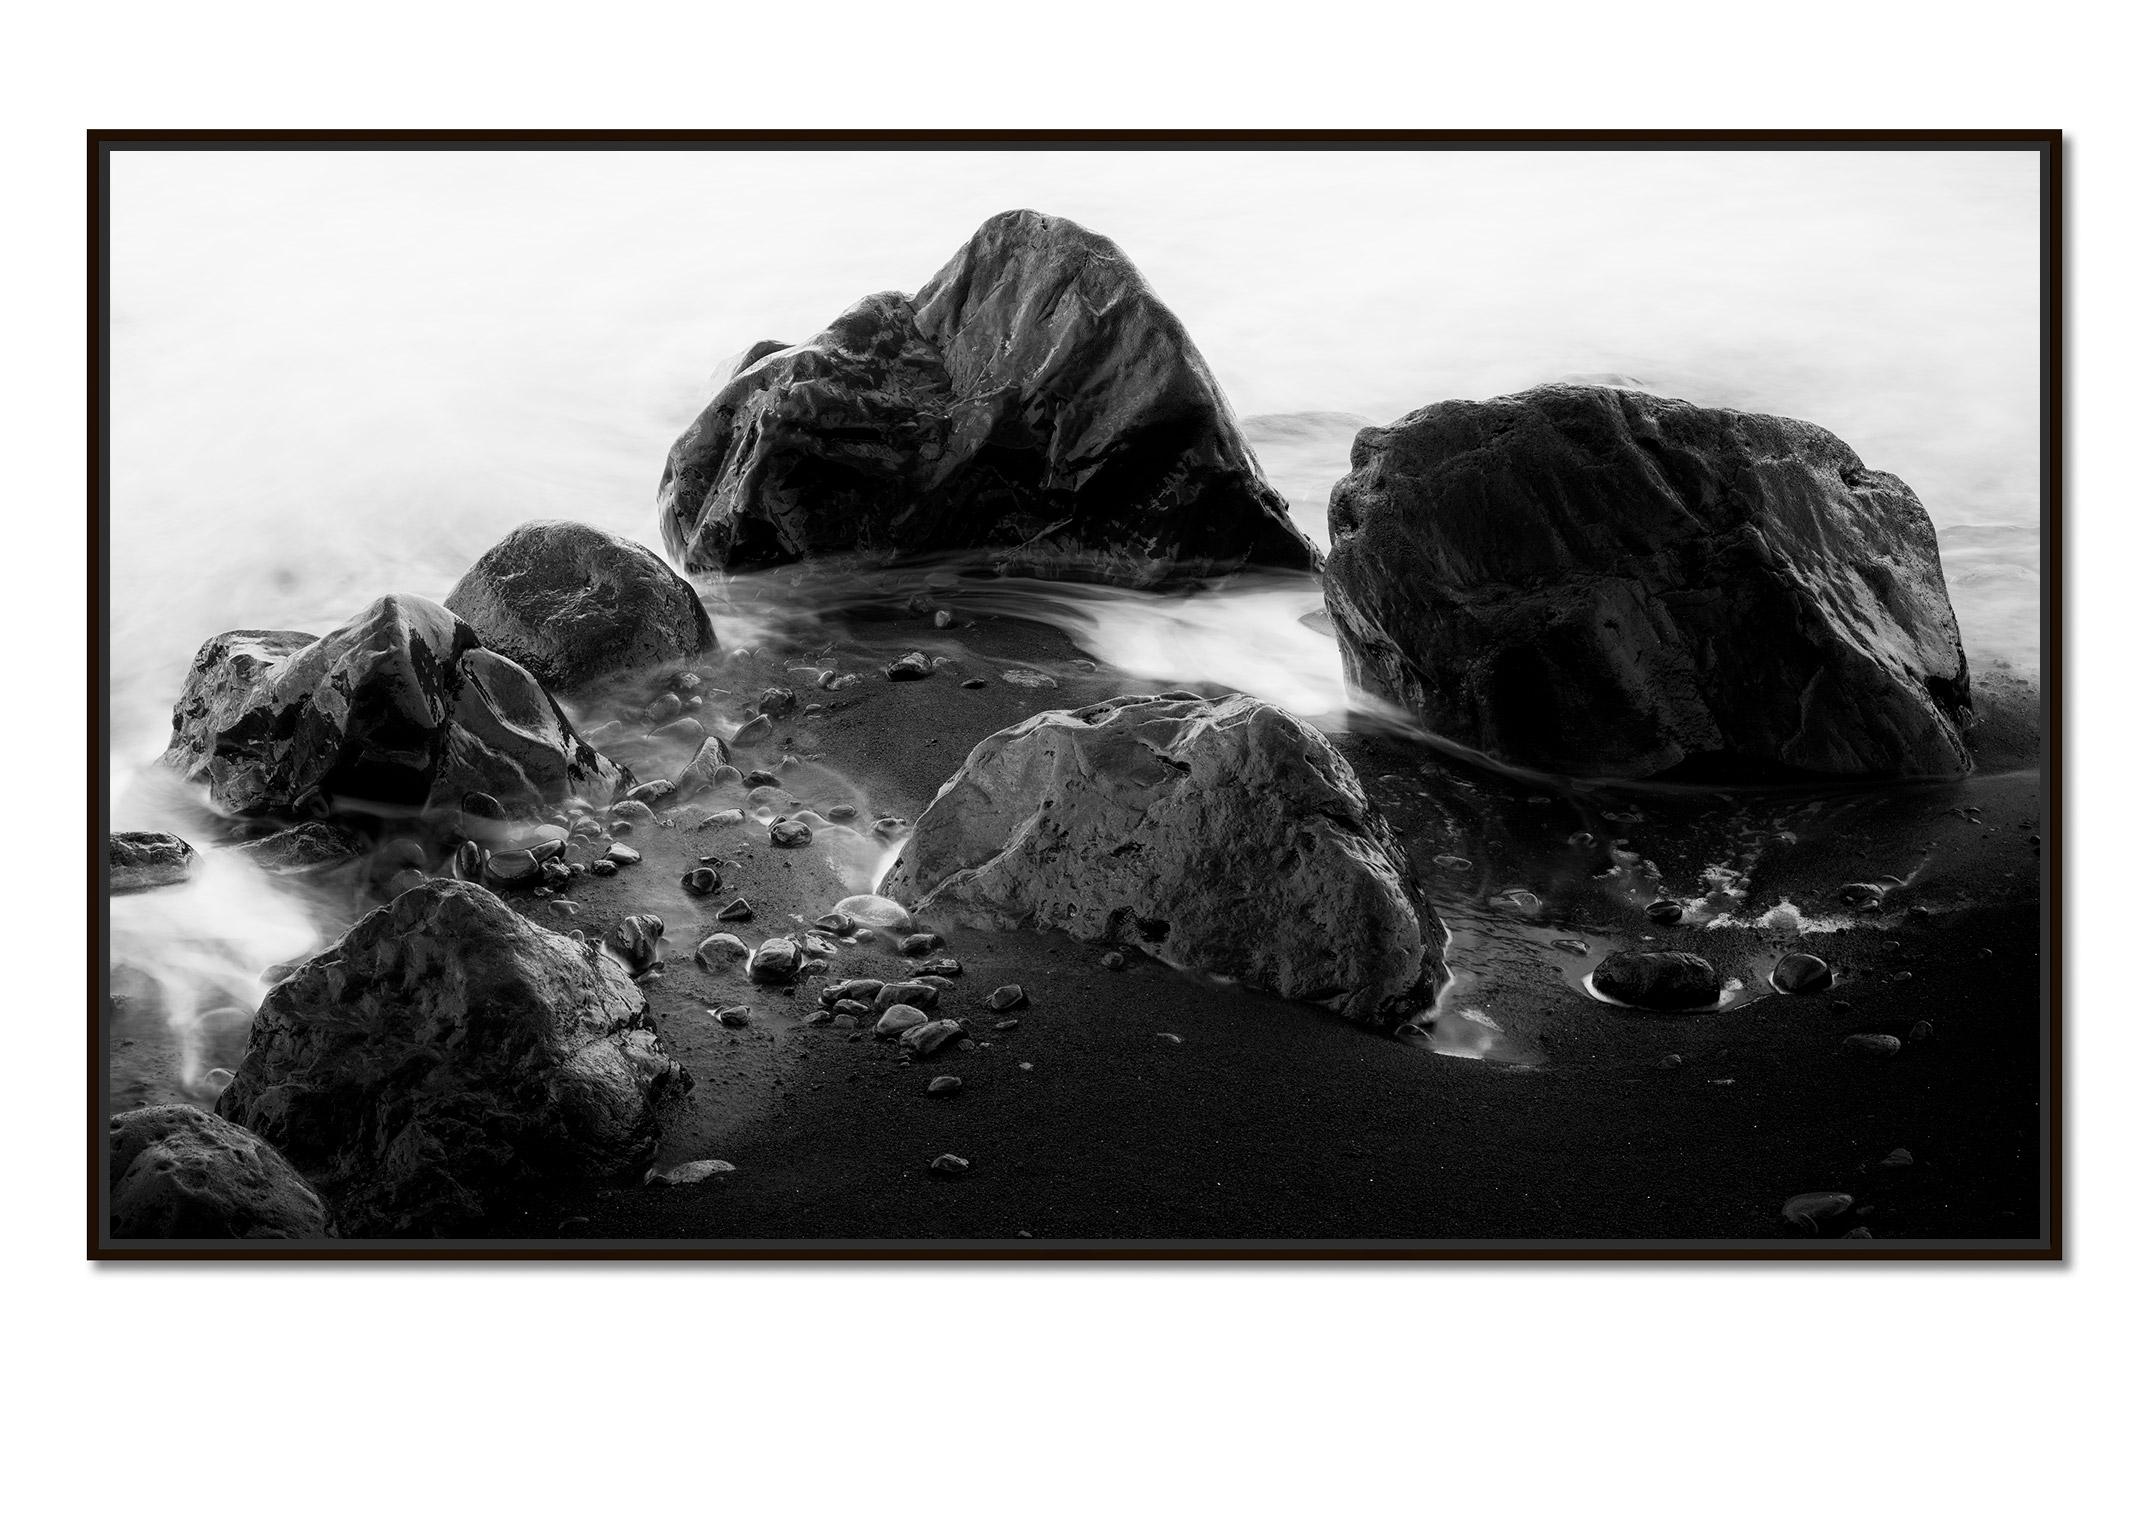 Black Stone Beach, giant Rocks, surf, Madeira, Portugal, black and white photo - Photograph by Gerald Berghammer